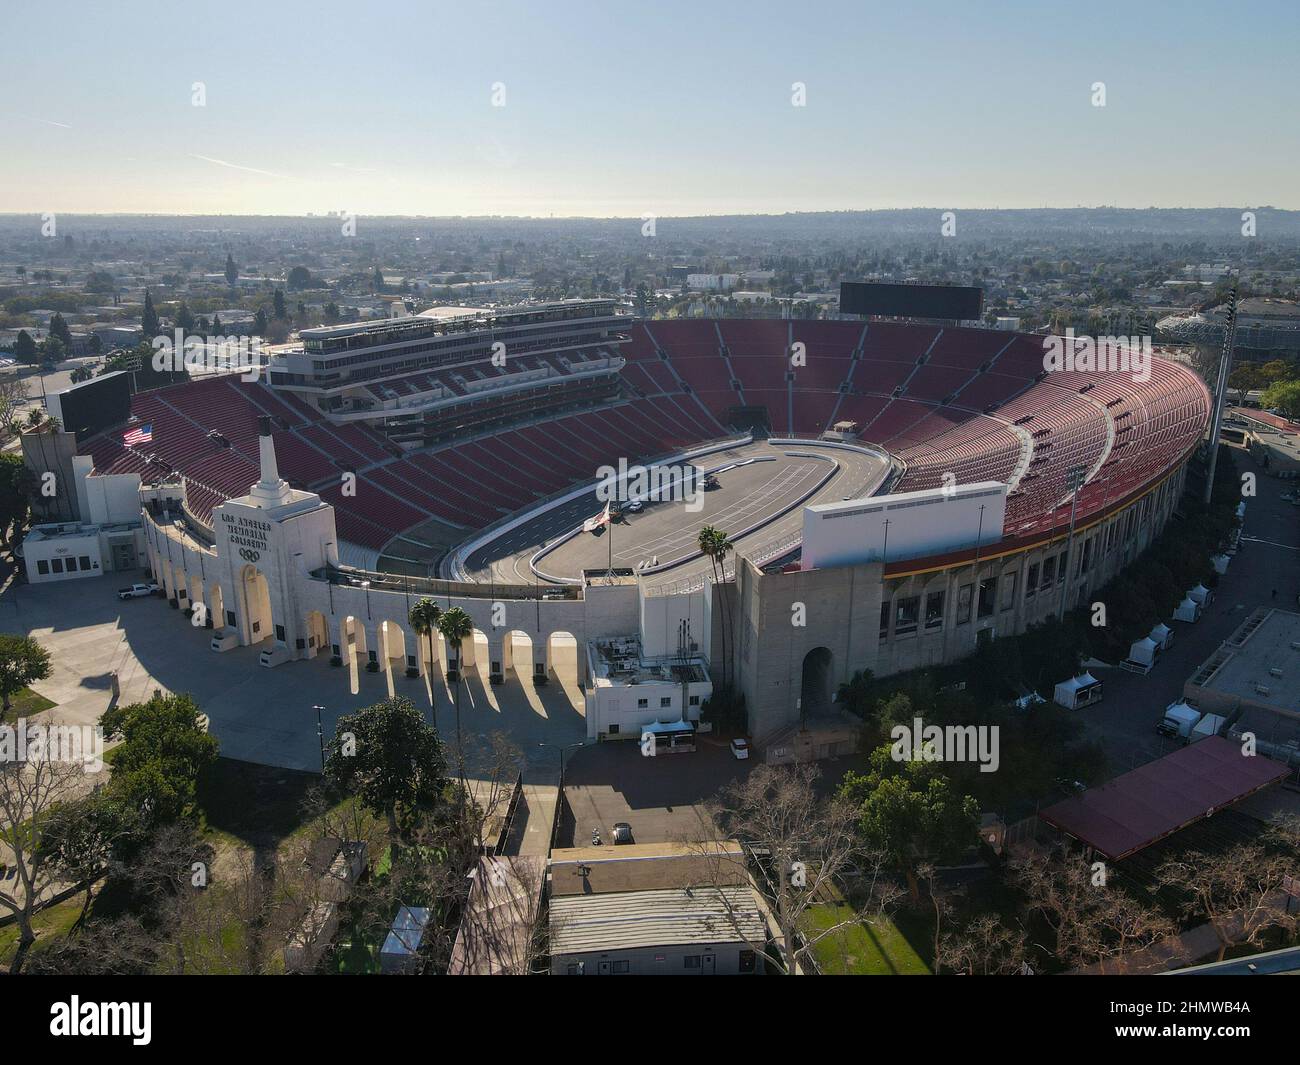 General aerial overall view of construction of a NASCAR track being built at the Los Angeles Memorial Coliseum on Monday, Jan 24, 2022 in Los Angeles. Stock Photo